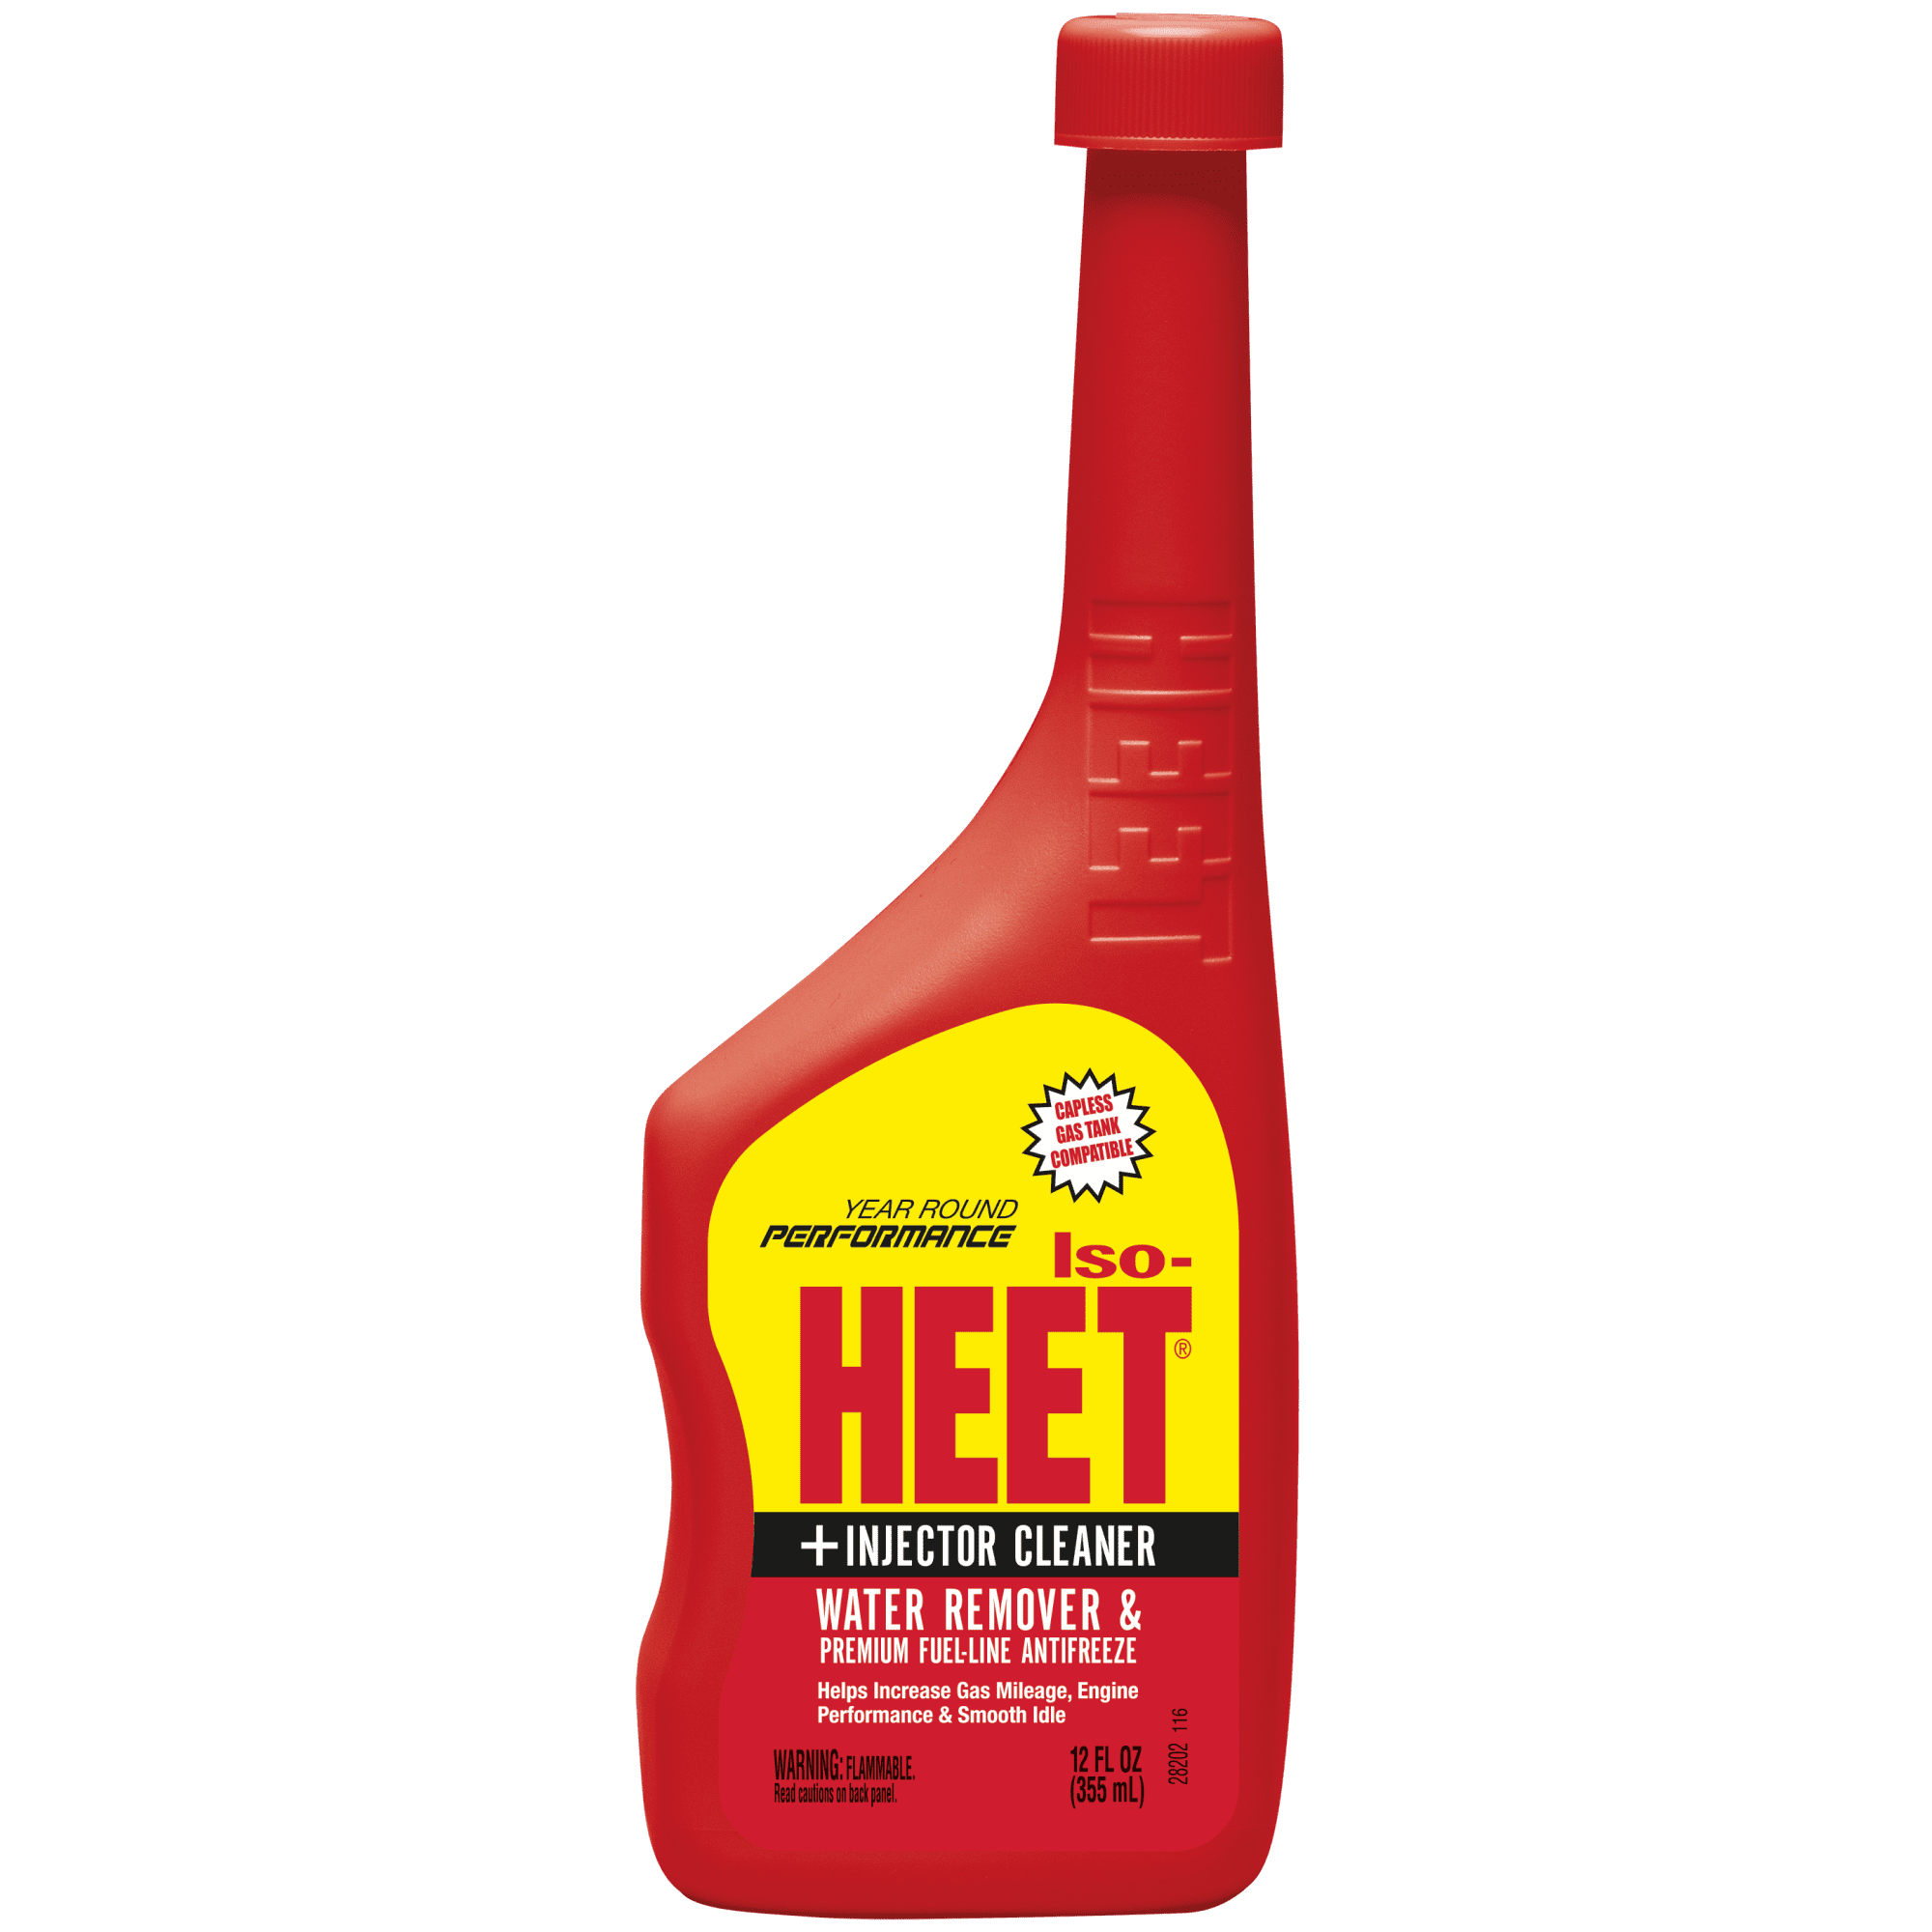 ISO-HEET Water Remover And Premium Fuel Line Antifreeze + Injector Cleaner - Helps Increase Gas Mileage - Improves Engine Performance - Year Round Performance, 12 fl. oz. (28202)